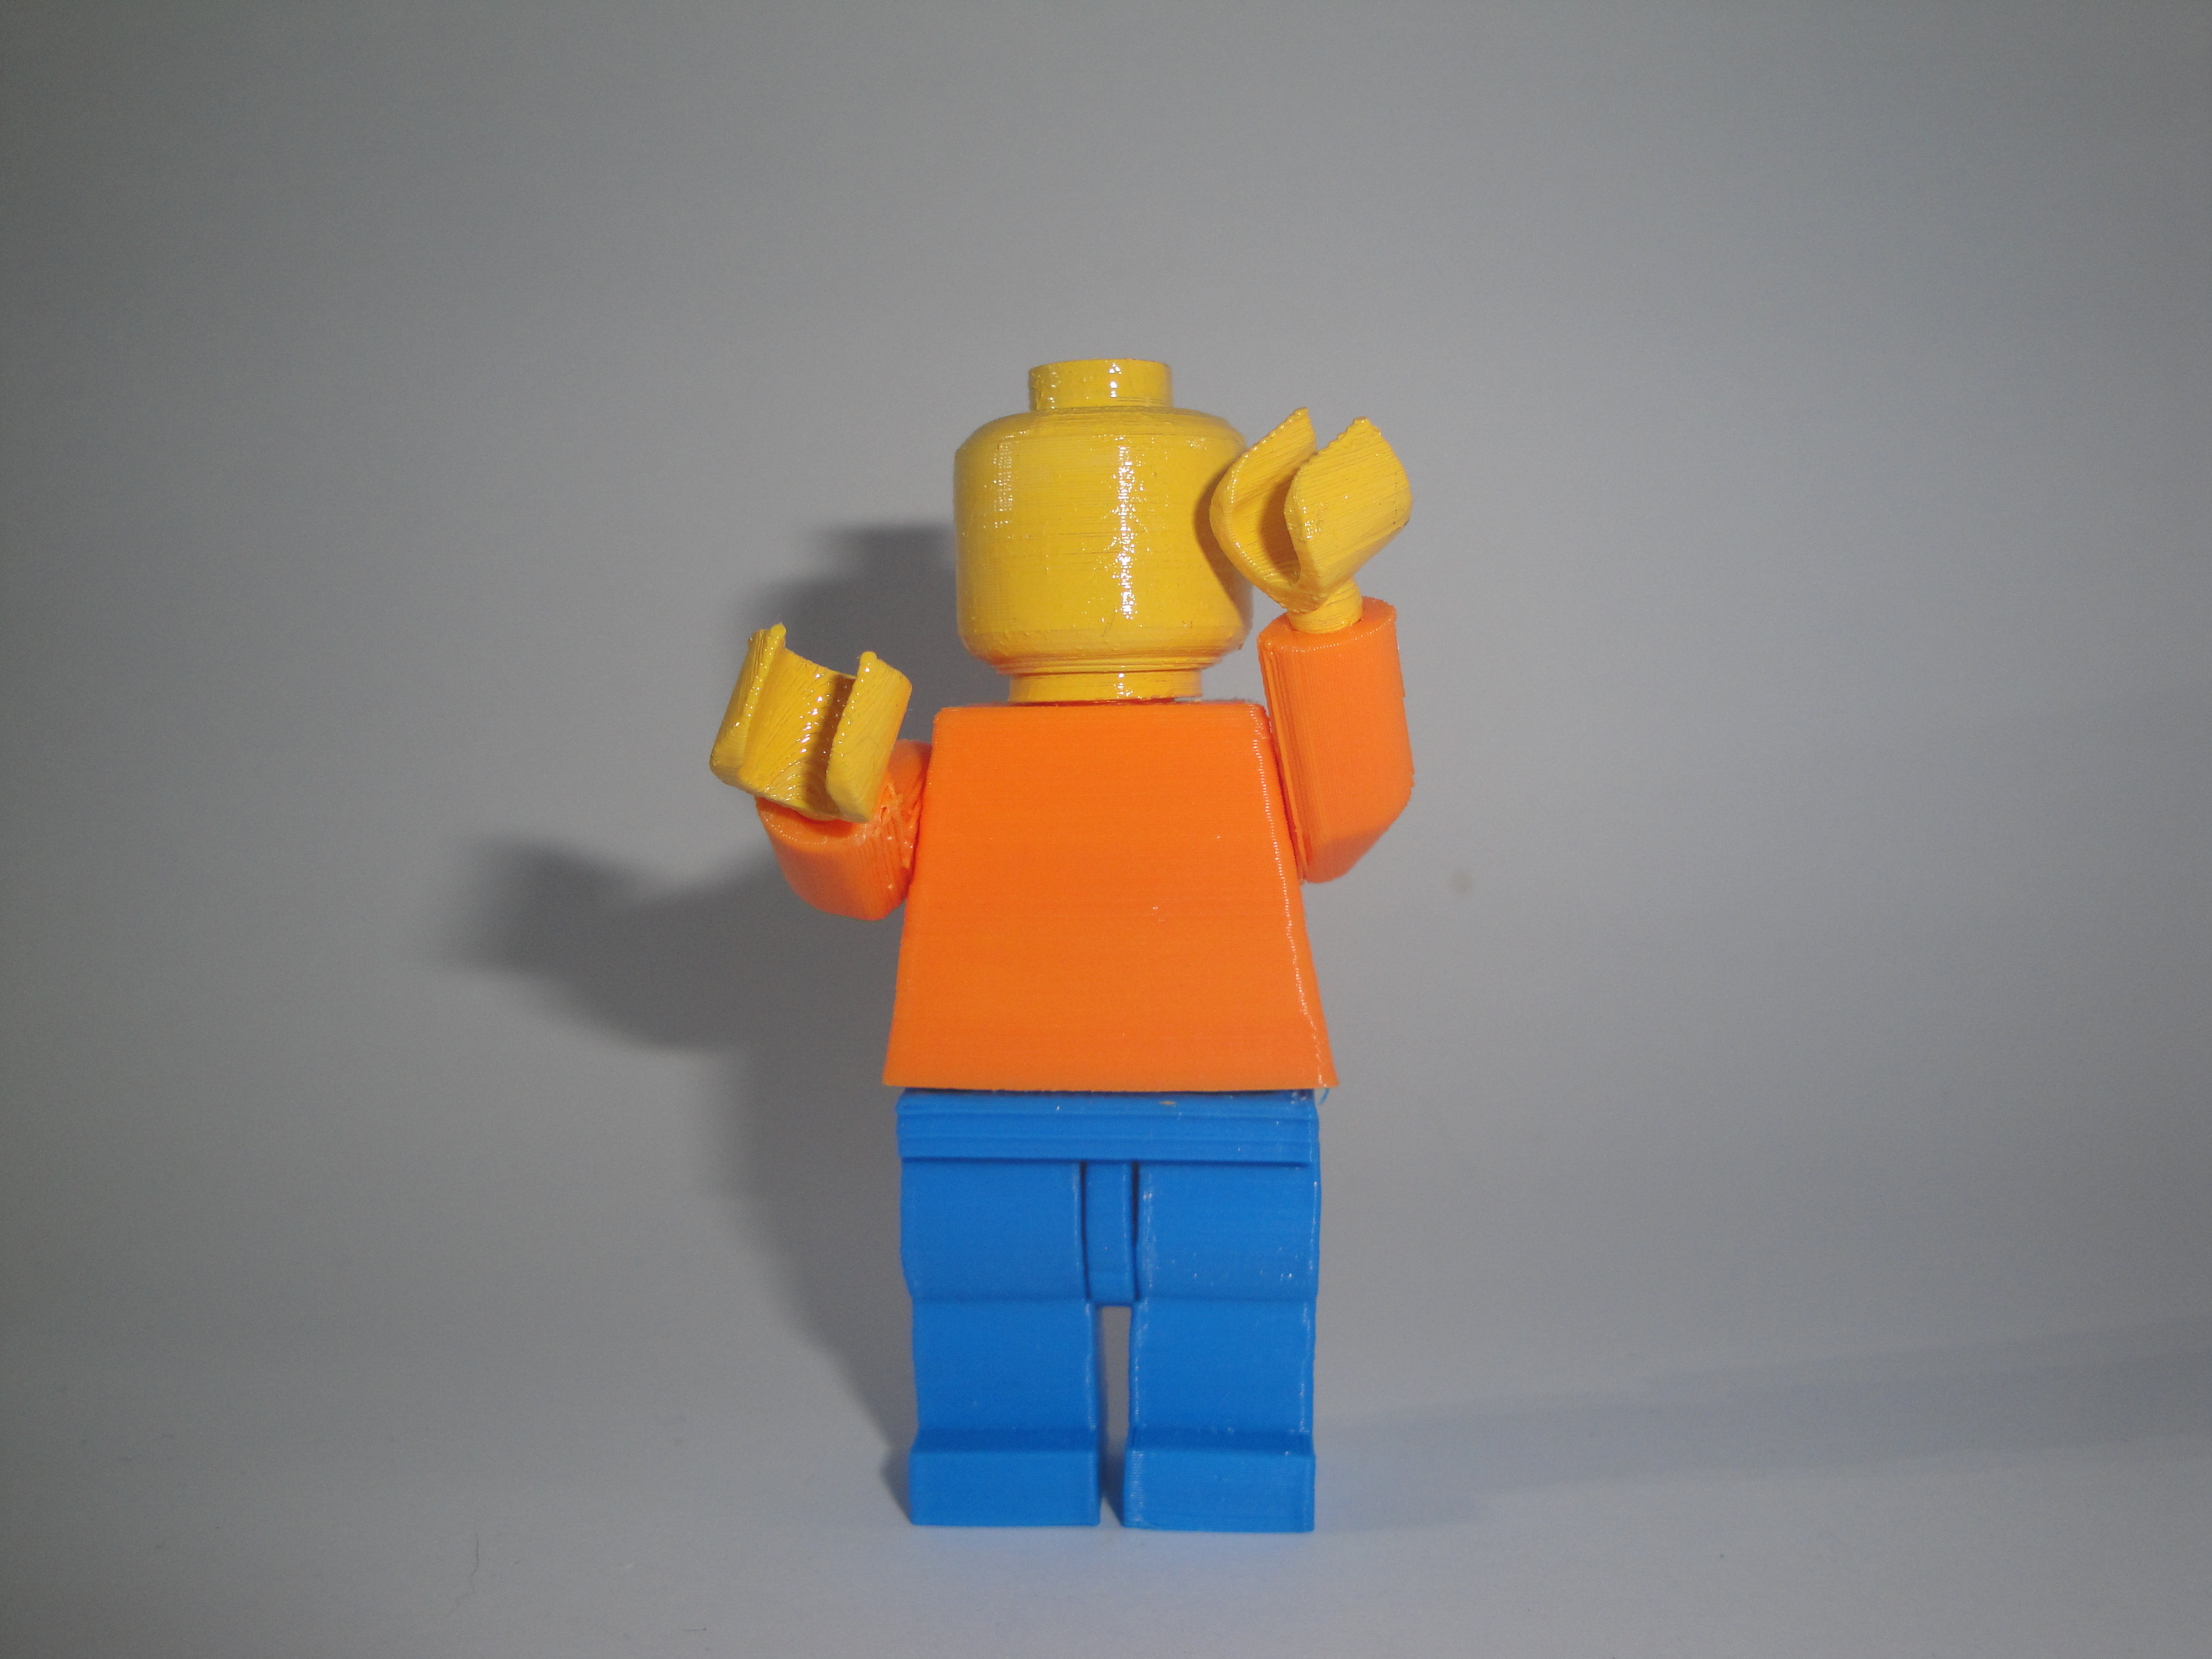 Giant Movable LEGO Man